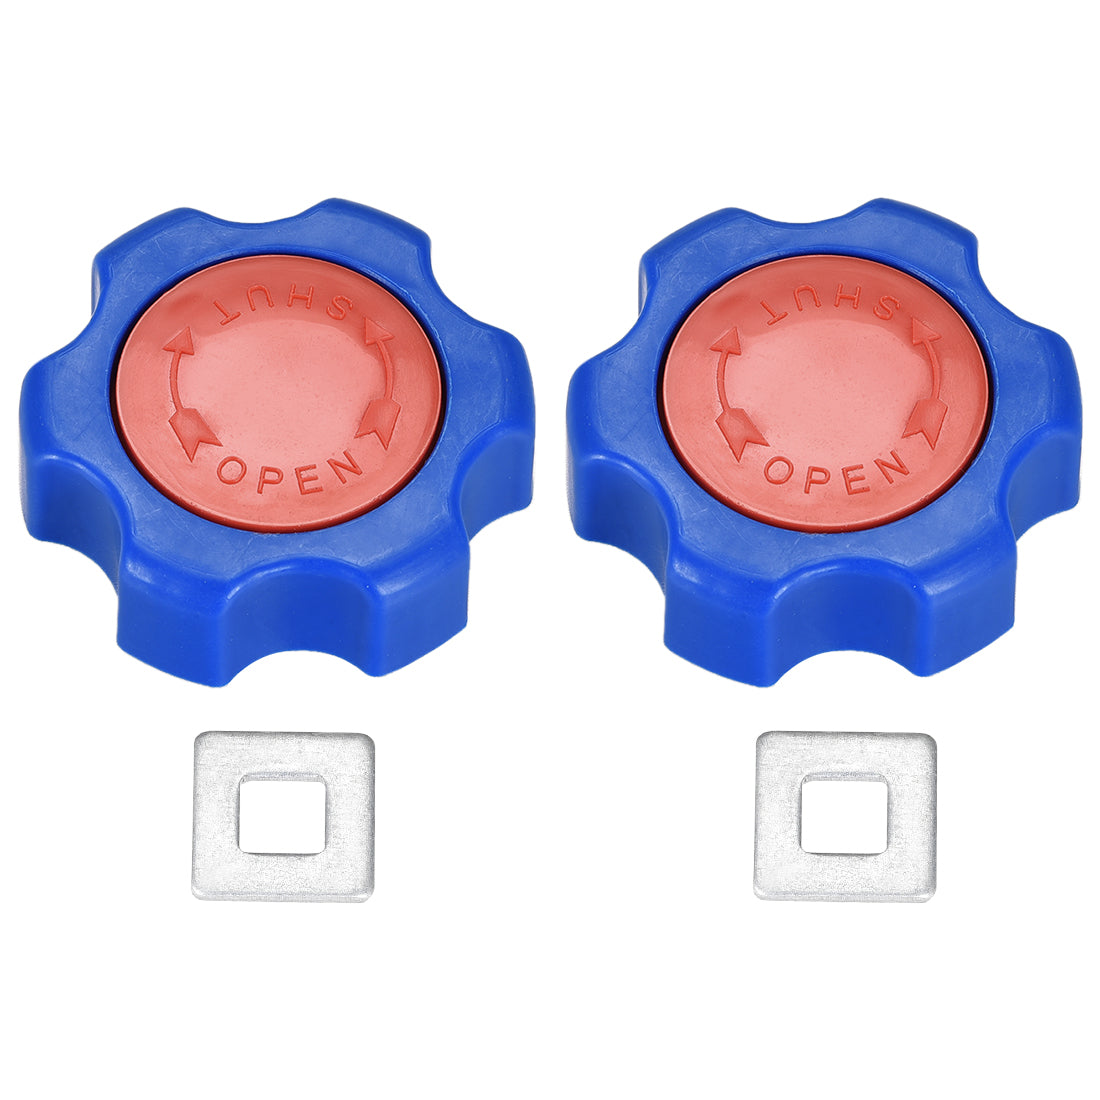 Uxcell Uxcell Round Wheel Handle, Square Broach 6x6mm, Wheel OD 58mm ABS Blue Red 2Pcs